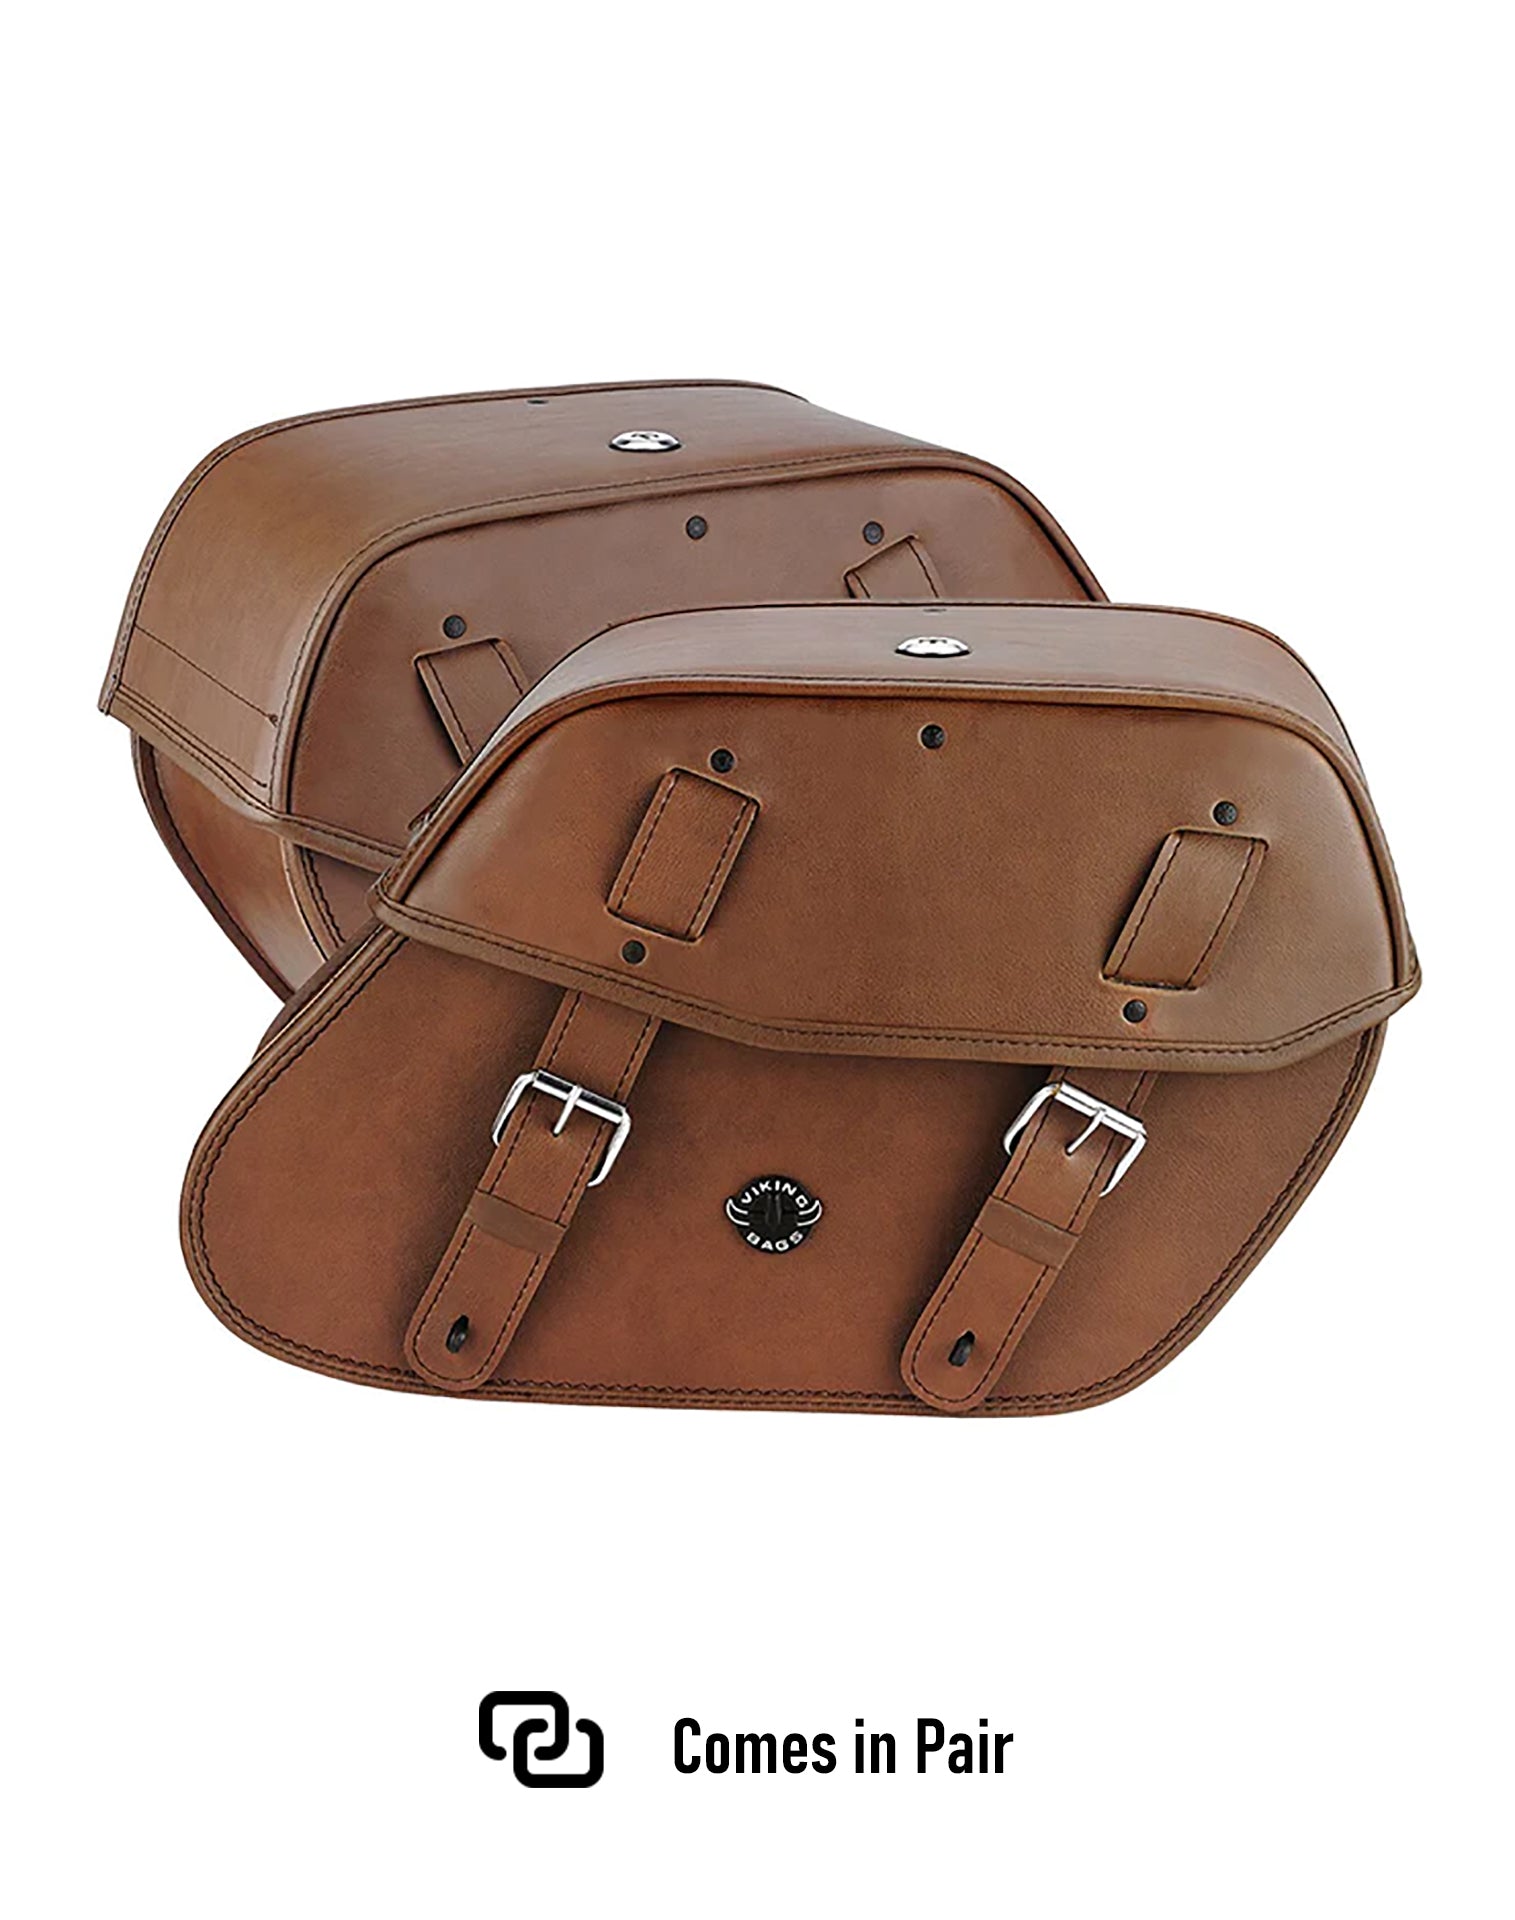 Viking Odin Brown Large Leather Motorcycle Saddlebags For Harley Softail Low Rider S Fxlrs Weather Resistant Bags Comes in Pair